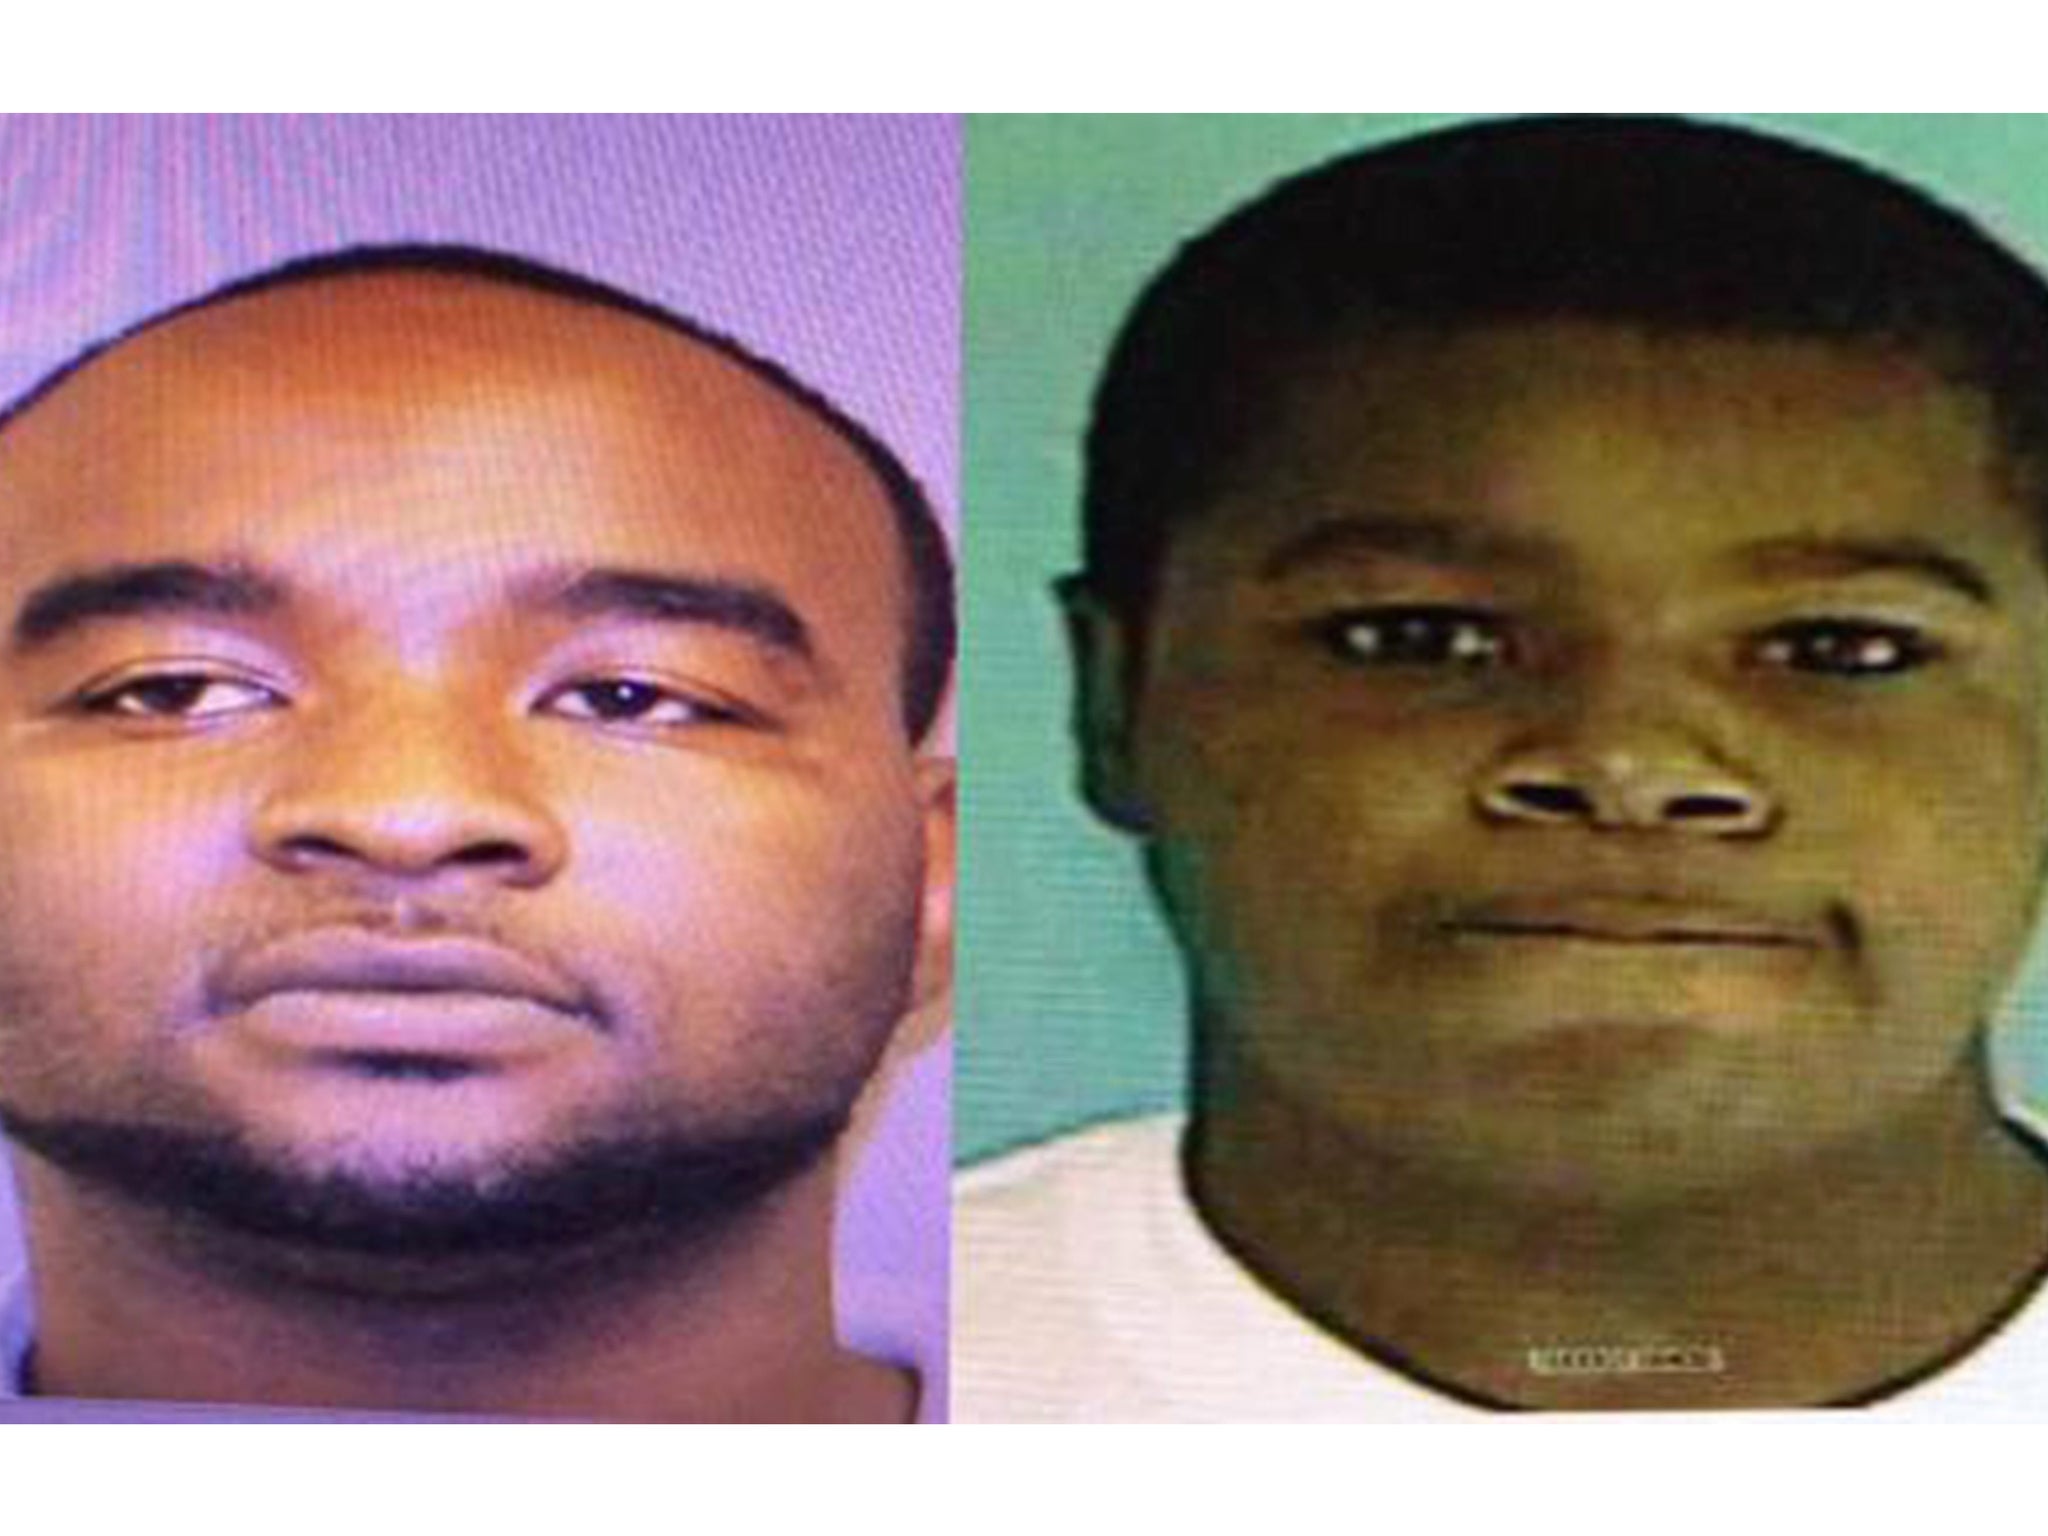 Brothers Curtis Banks, 26, and Marvin Banks, 29, have been named as suspects